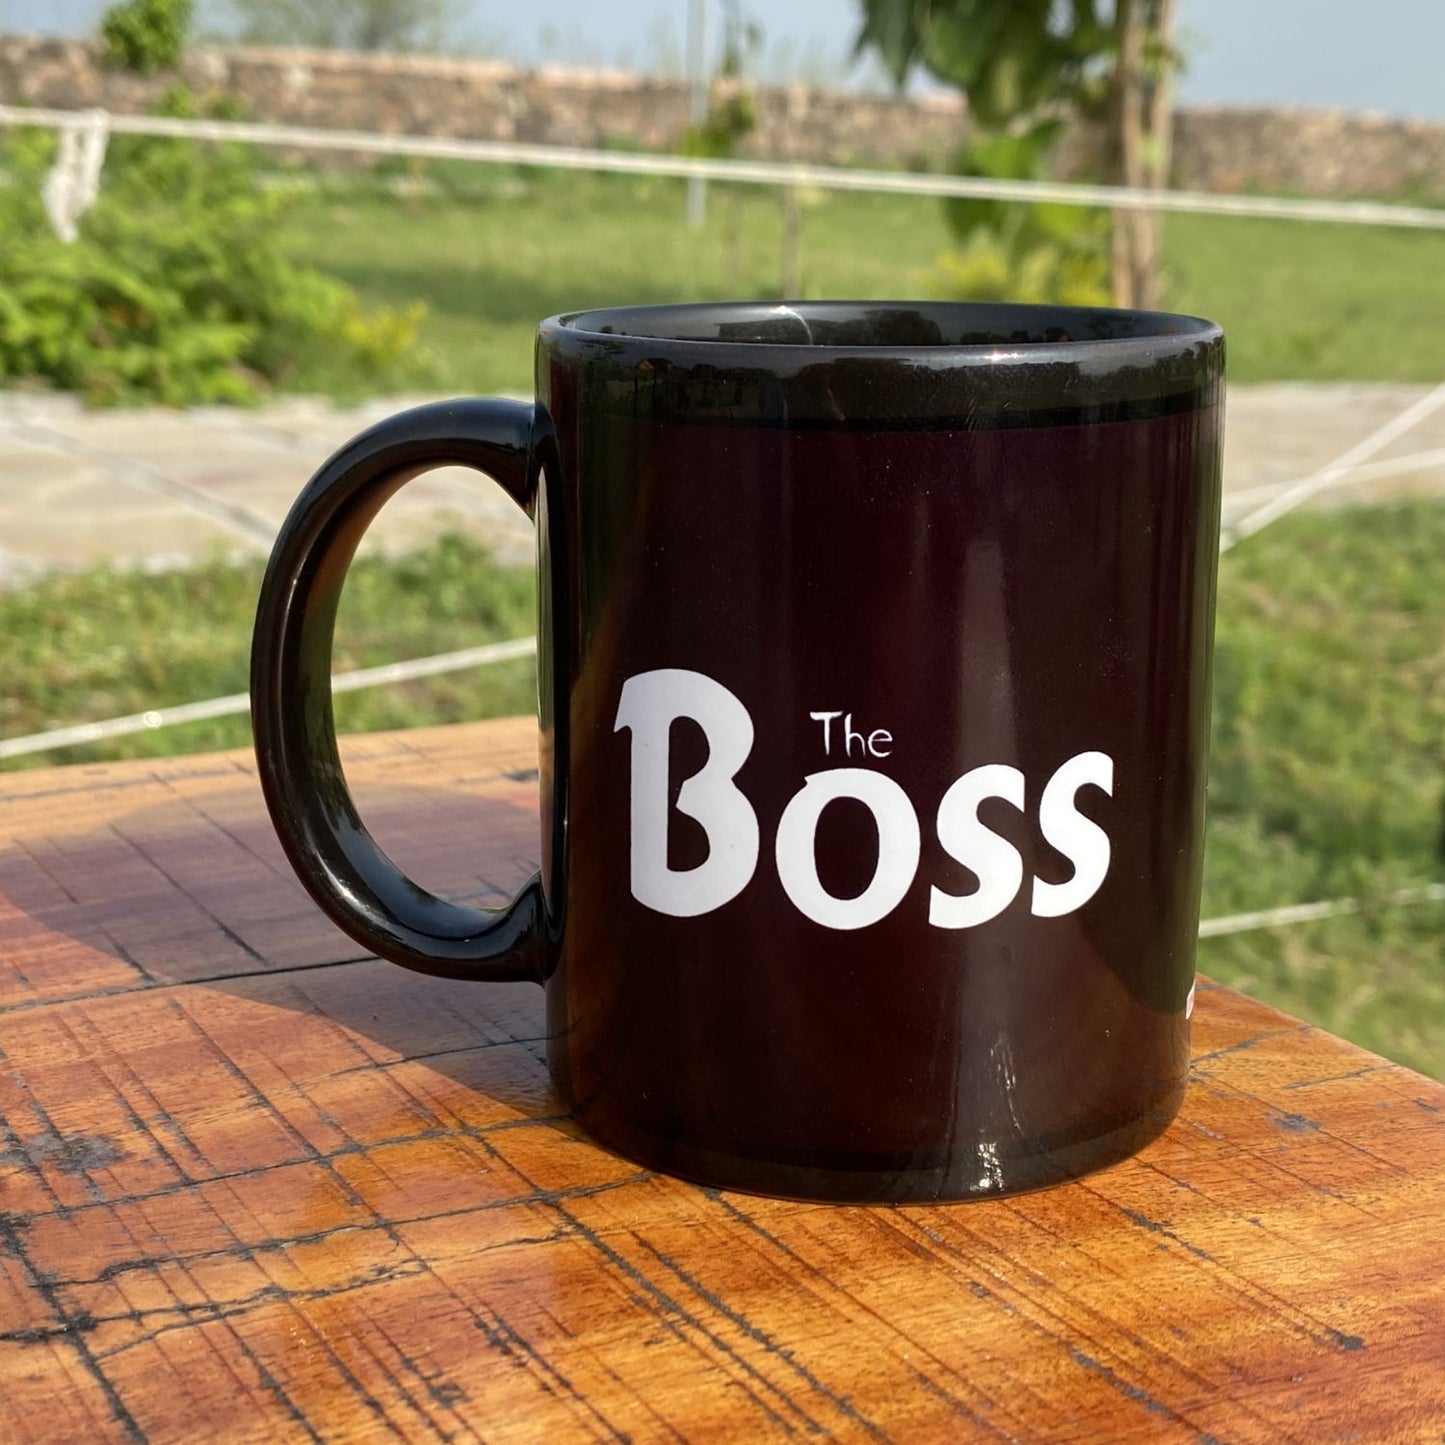 The Boss and The Real Boss (couple mugs)